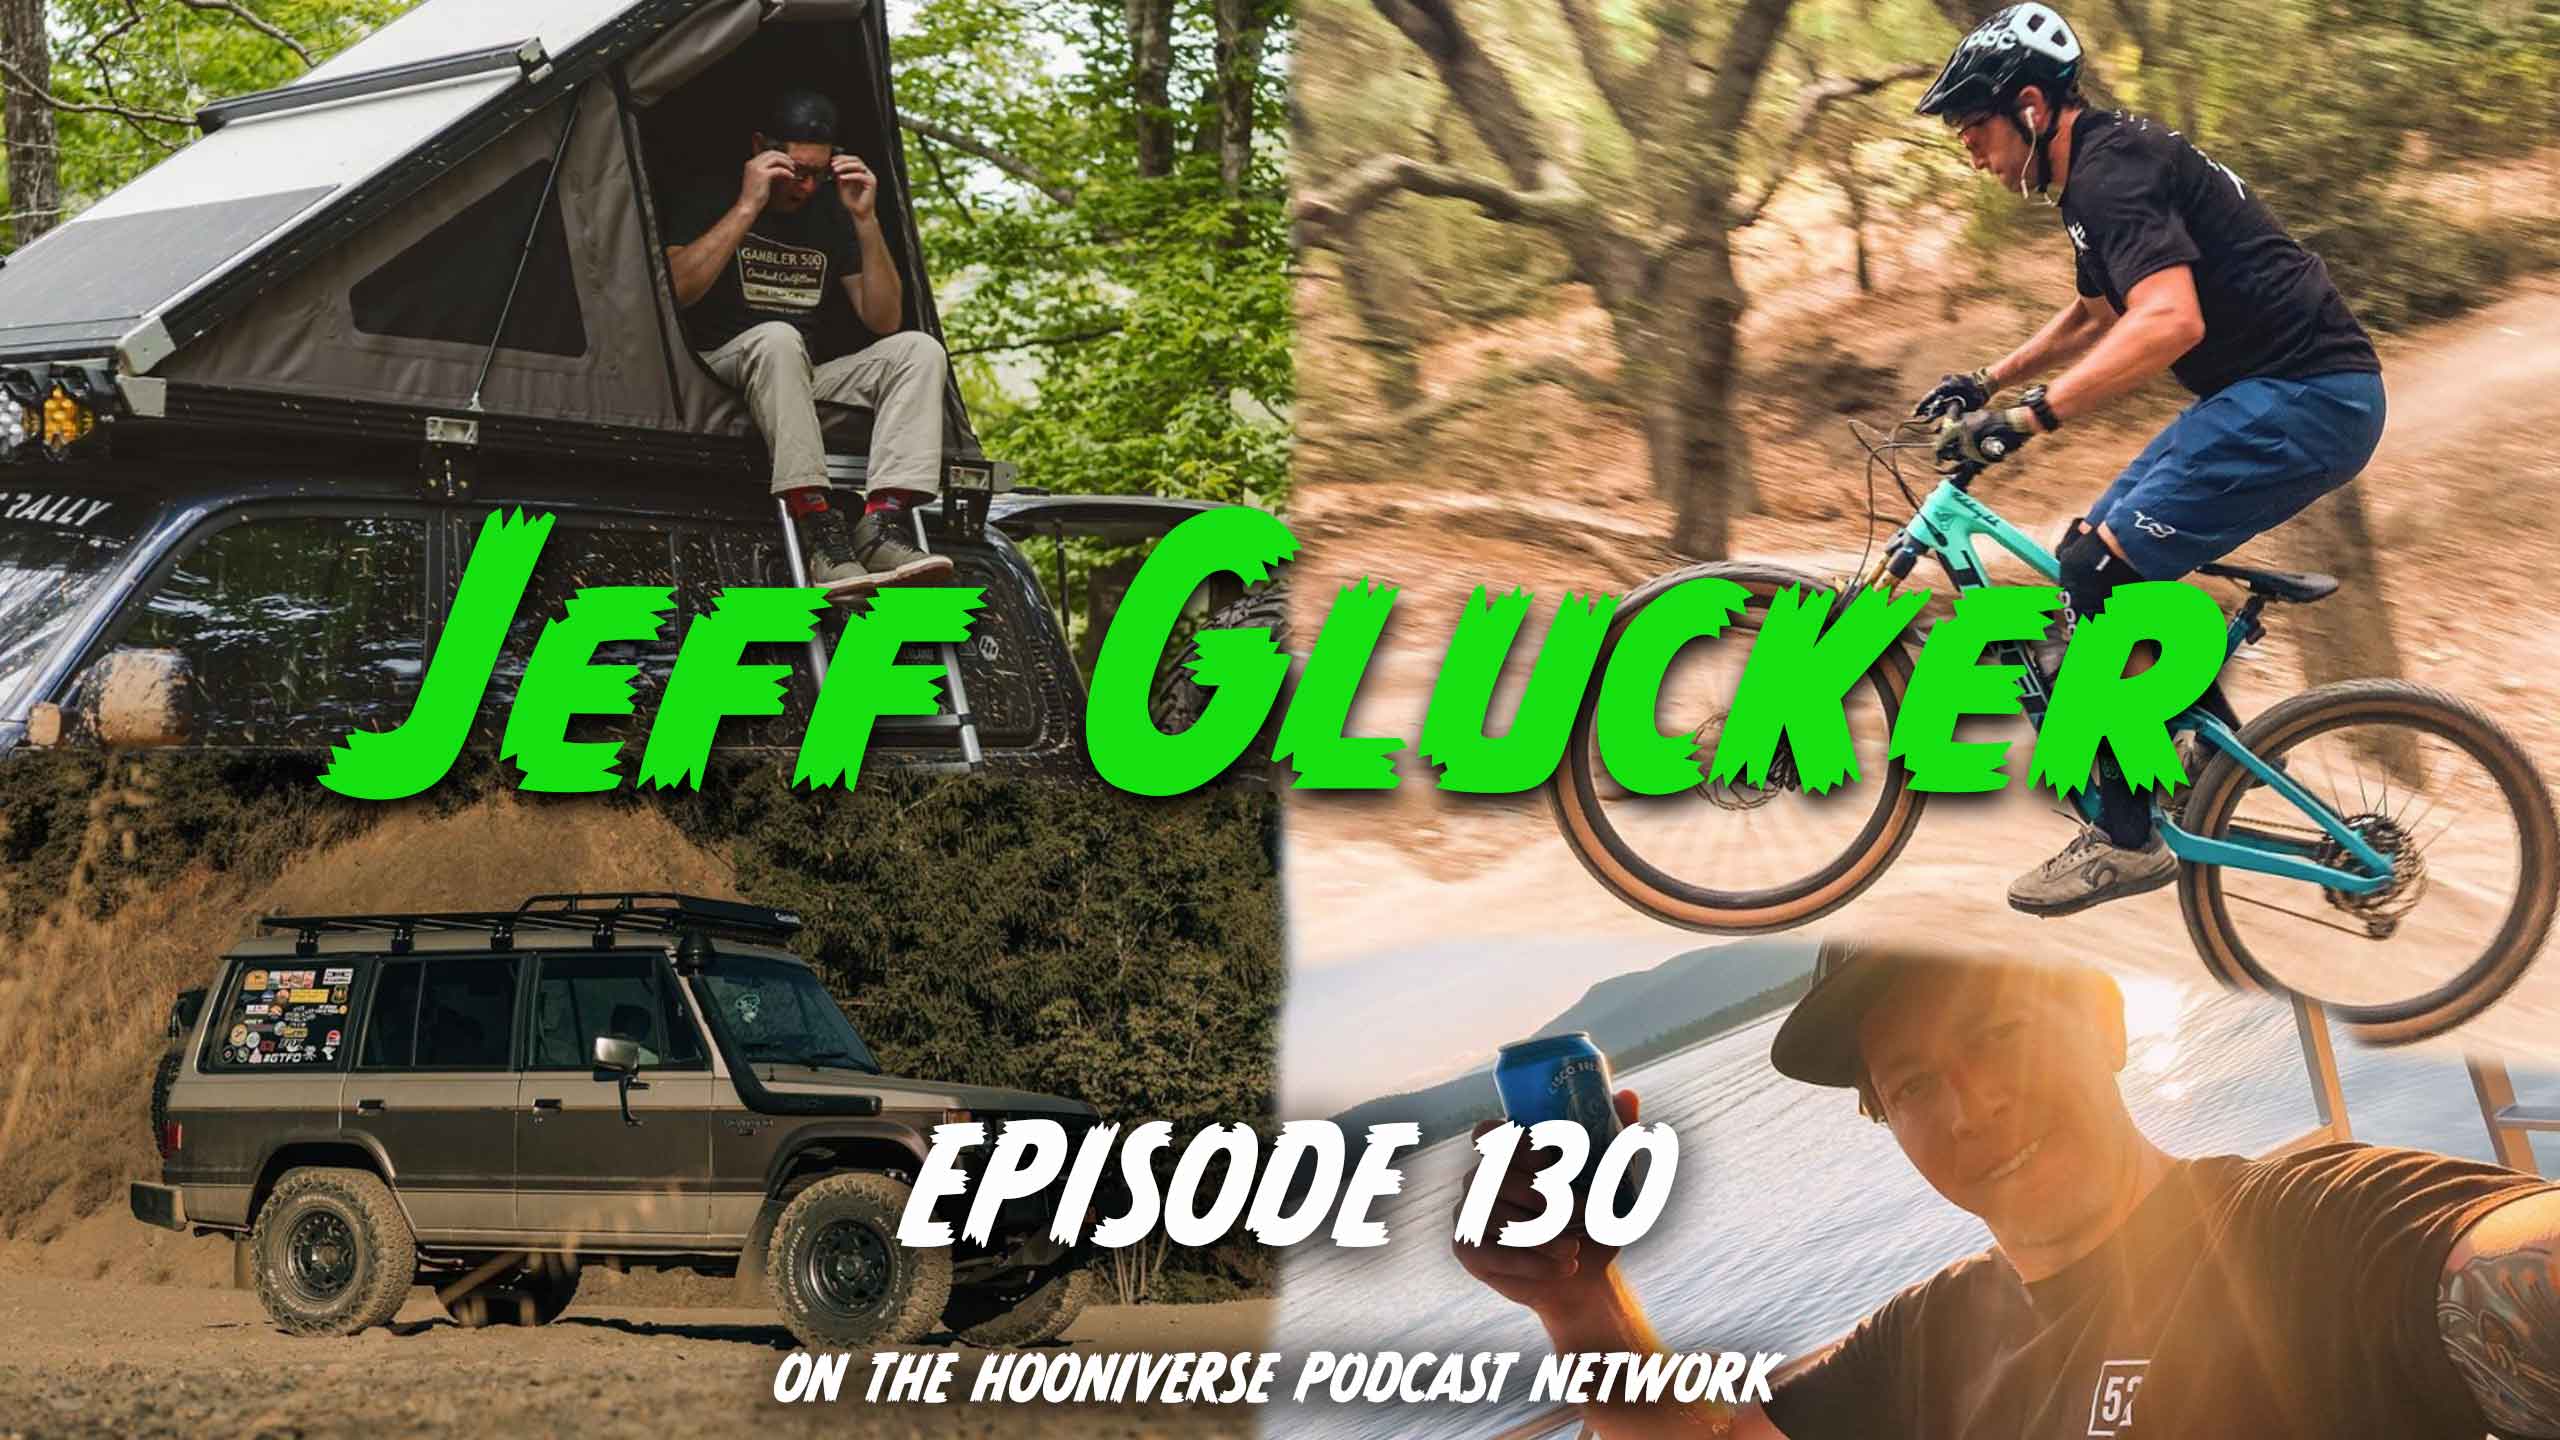 Jeff-Glucker-Off-The-Road-Again-Podcast-Episode-130